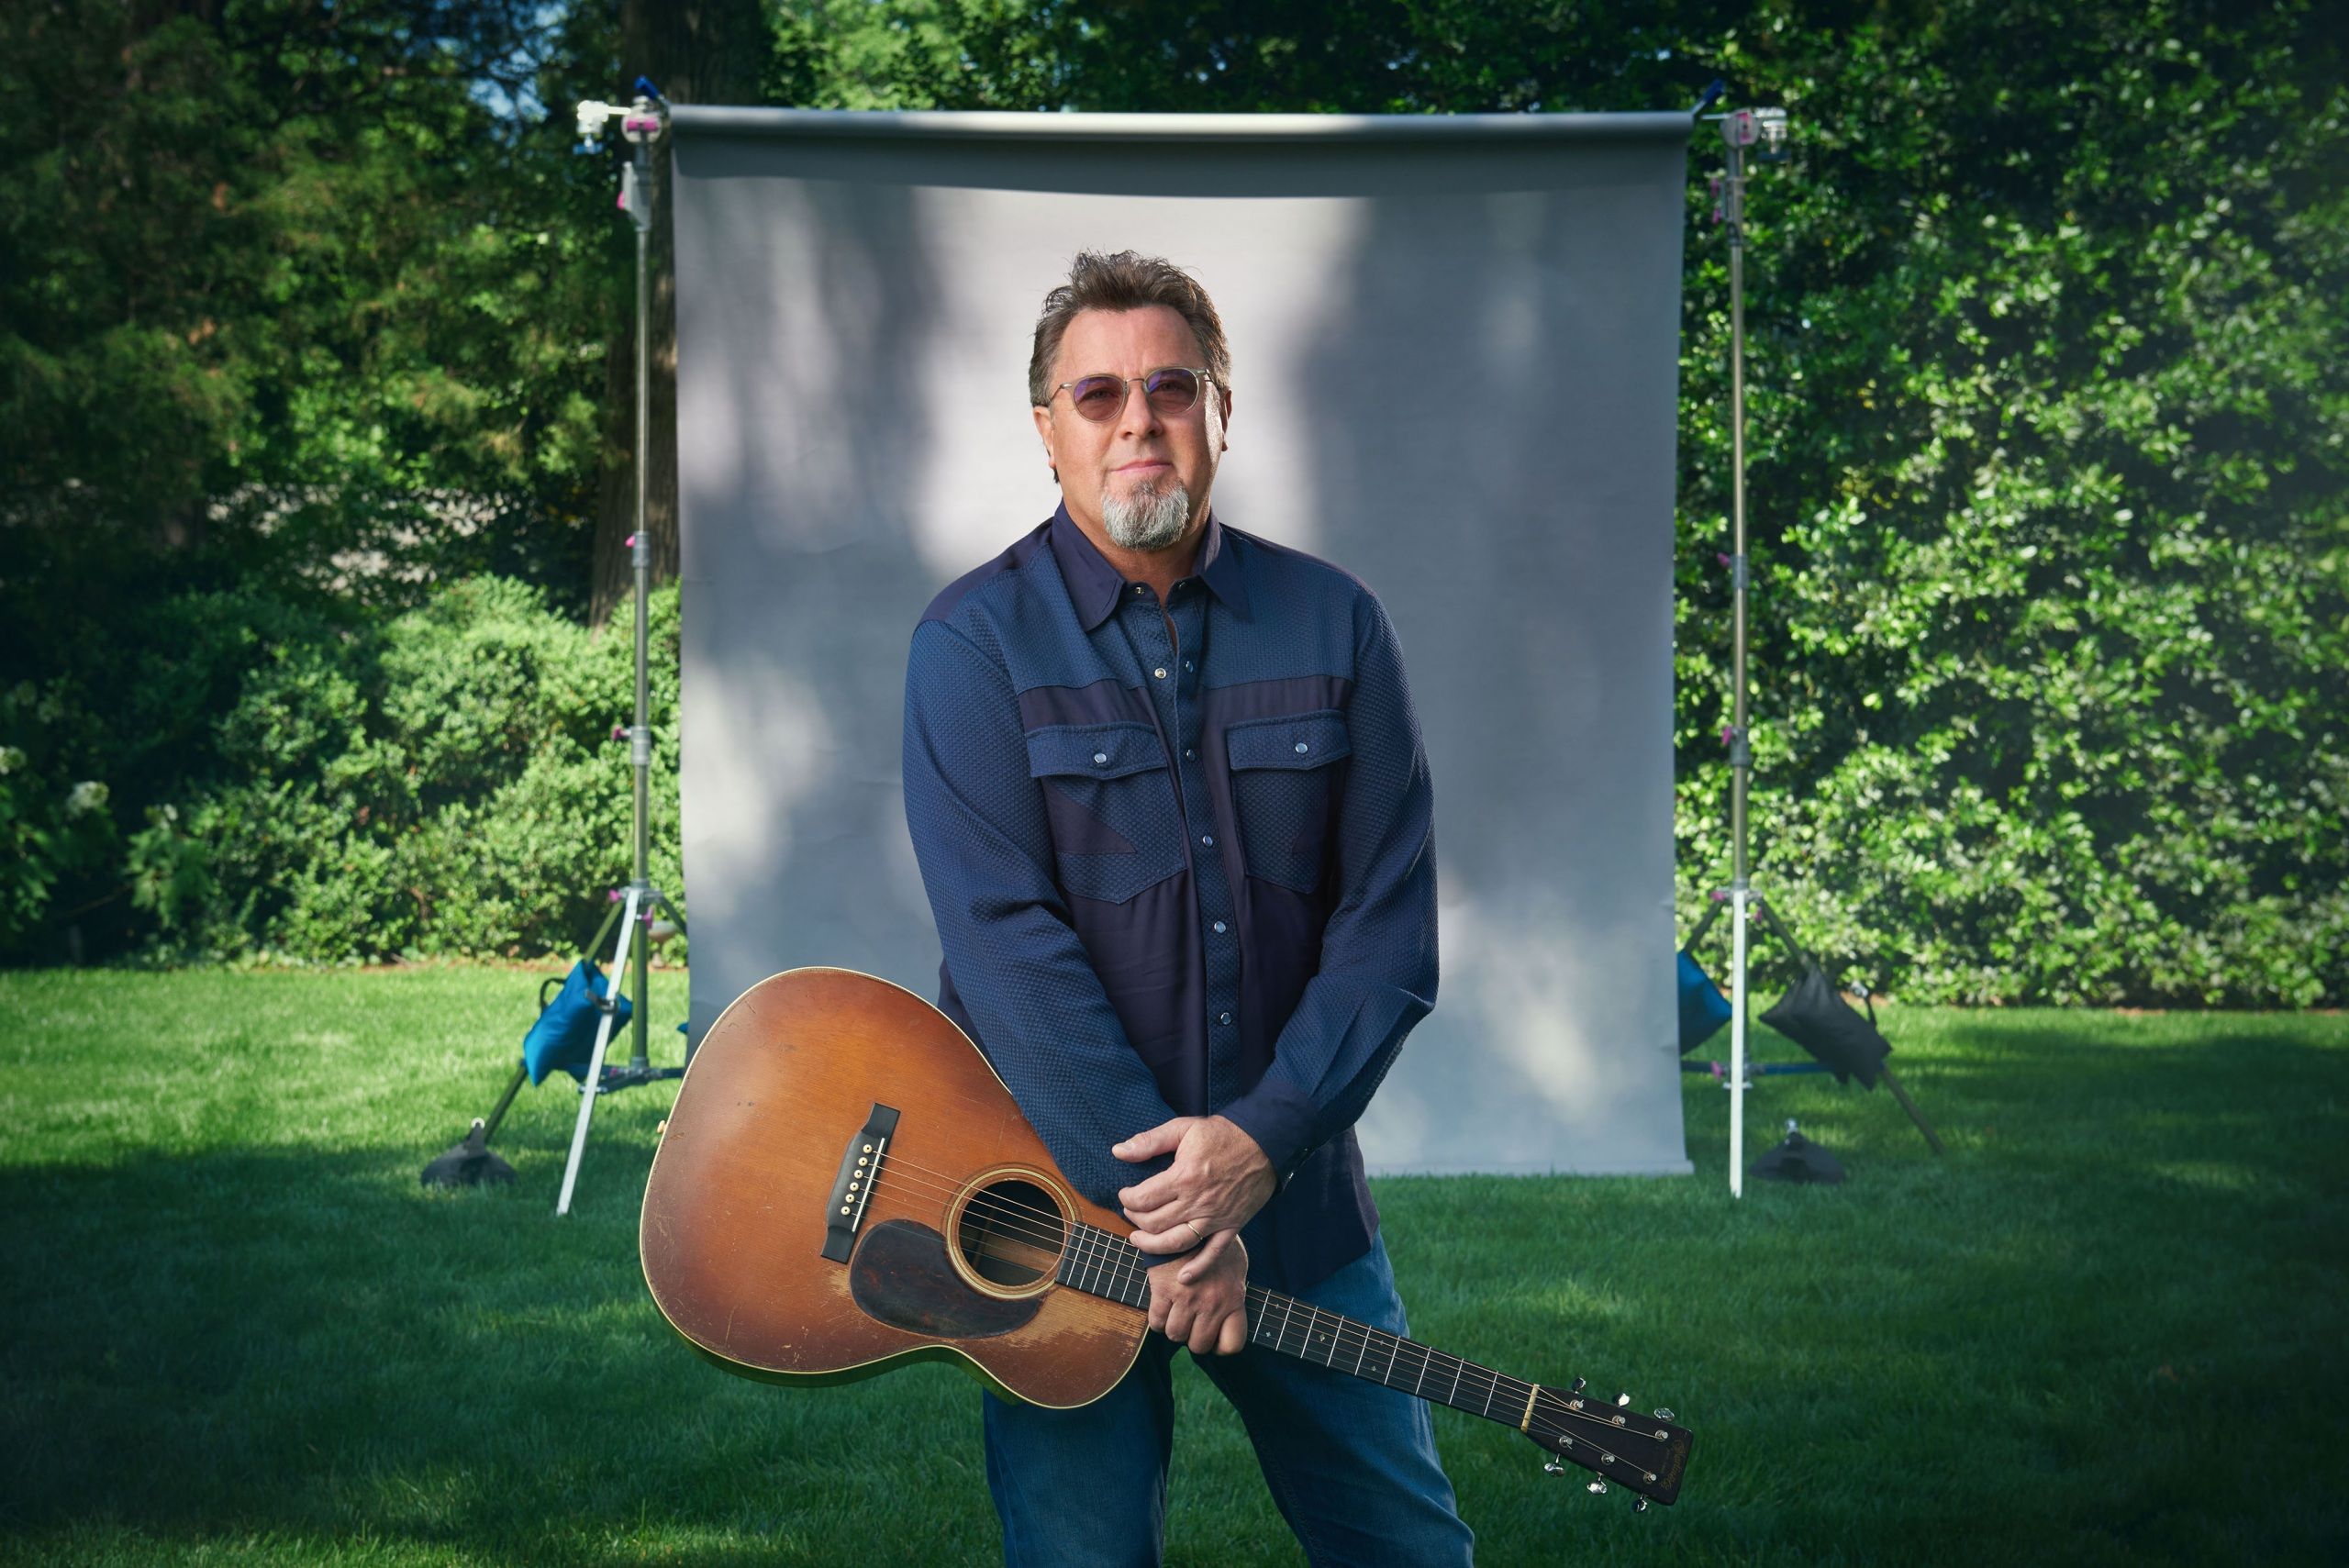 COUNTRY MUSIC ICON VINCE GILL TO HELP RYMAN AUDITORIUM CELEBRATE 130TH ANNIVERSARY WITH FOUR-NIGHT RESIDENCY